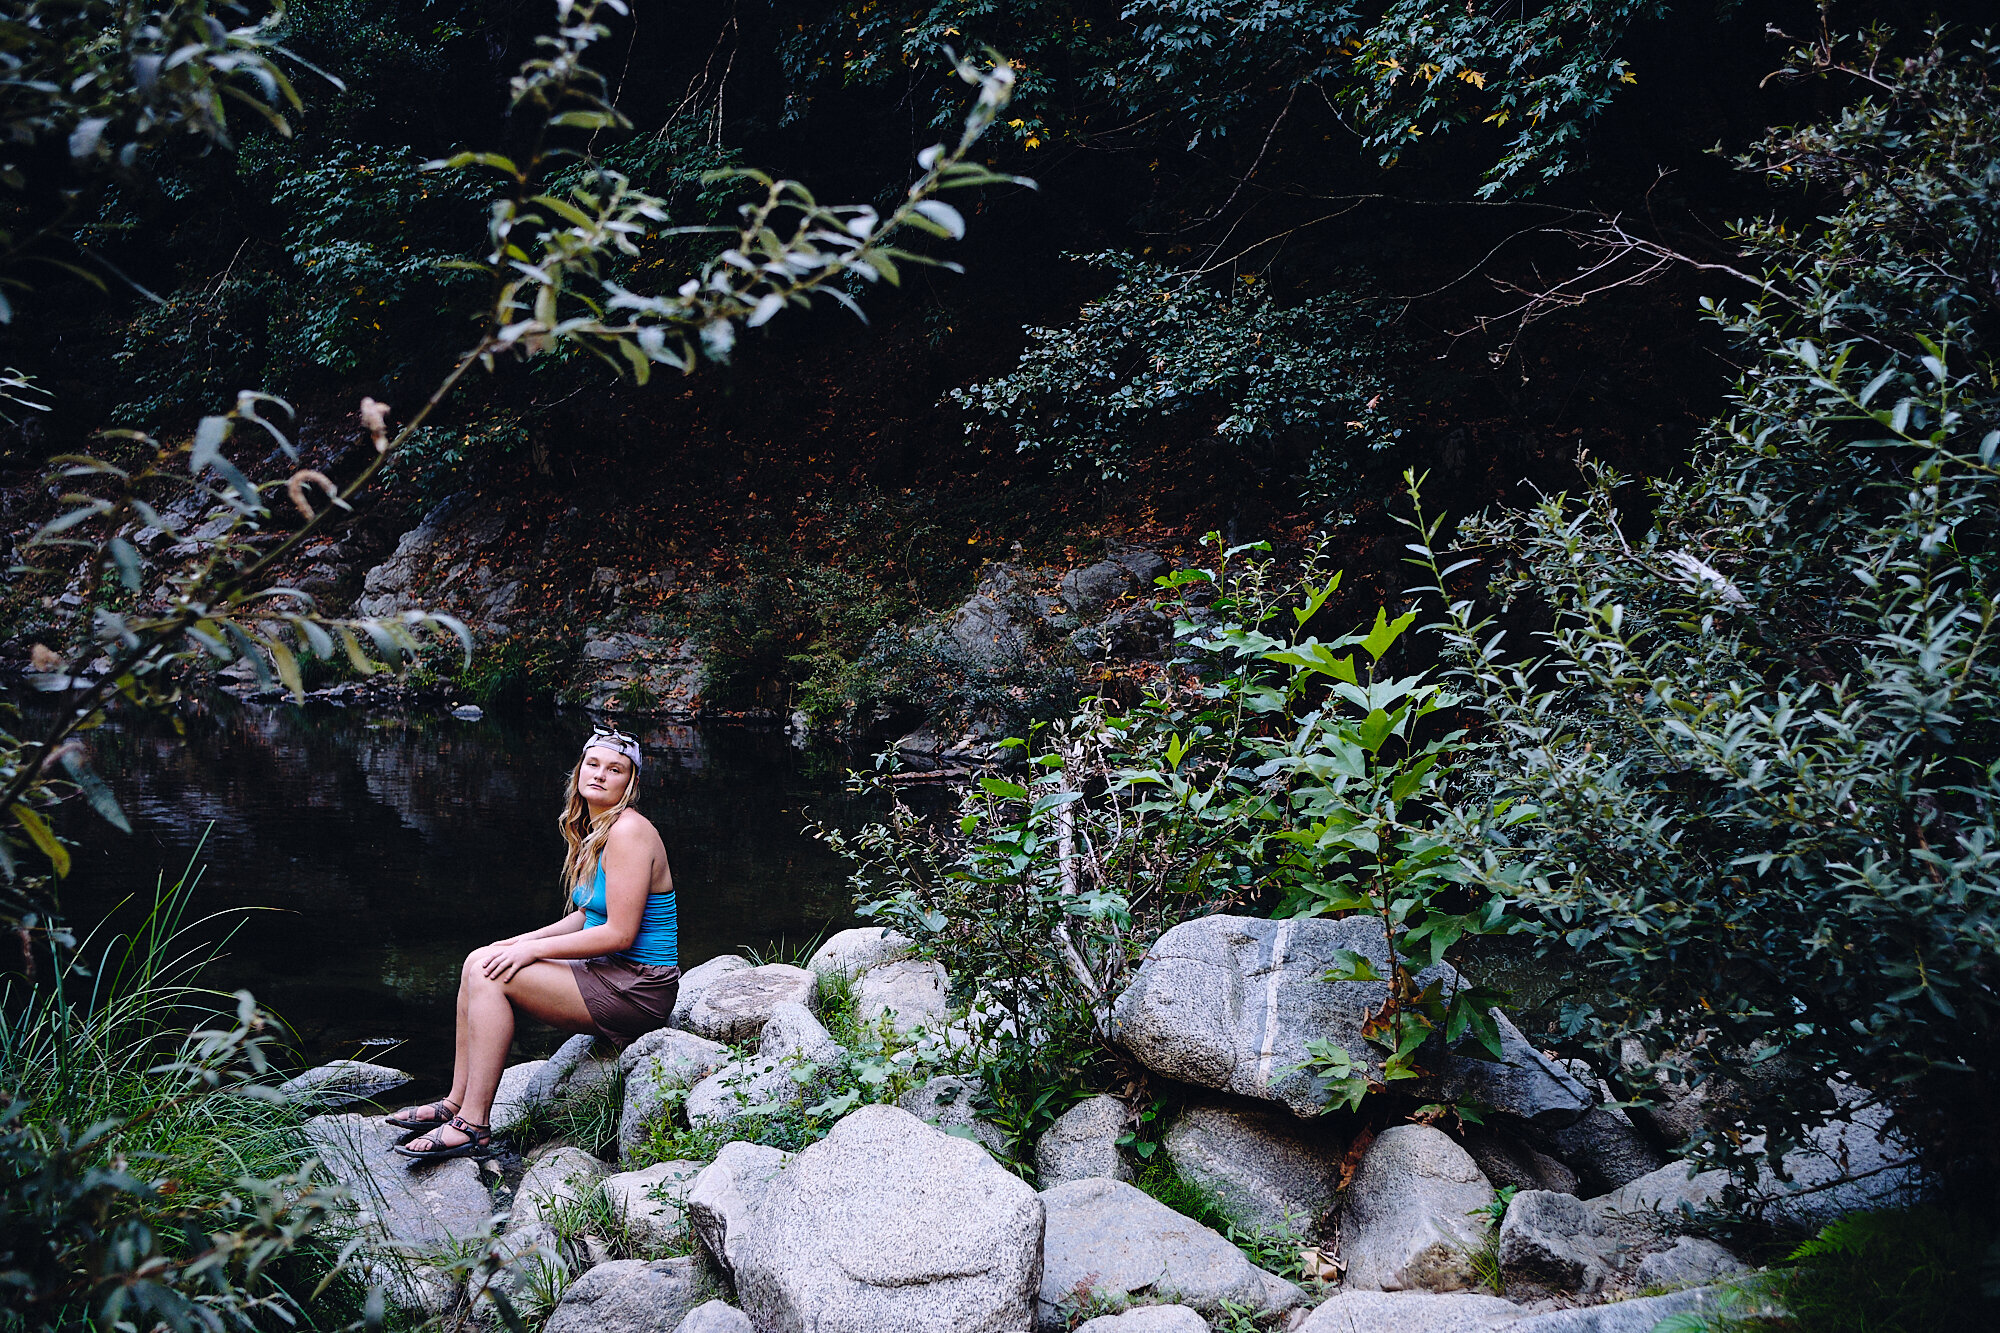  Sierra soaks up the sounds and smells of the woods in the Garden of Eden. | 9/24/20 Santa Cruz, CA 